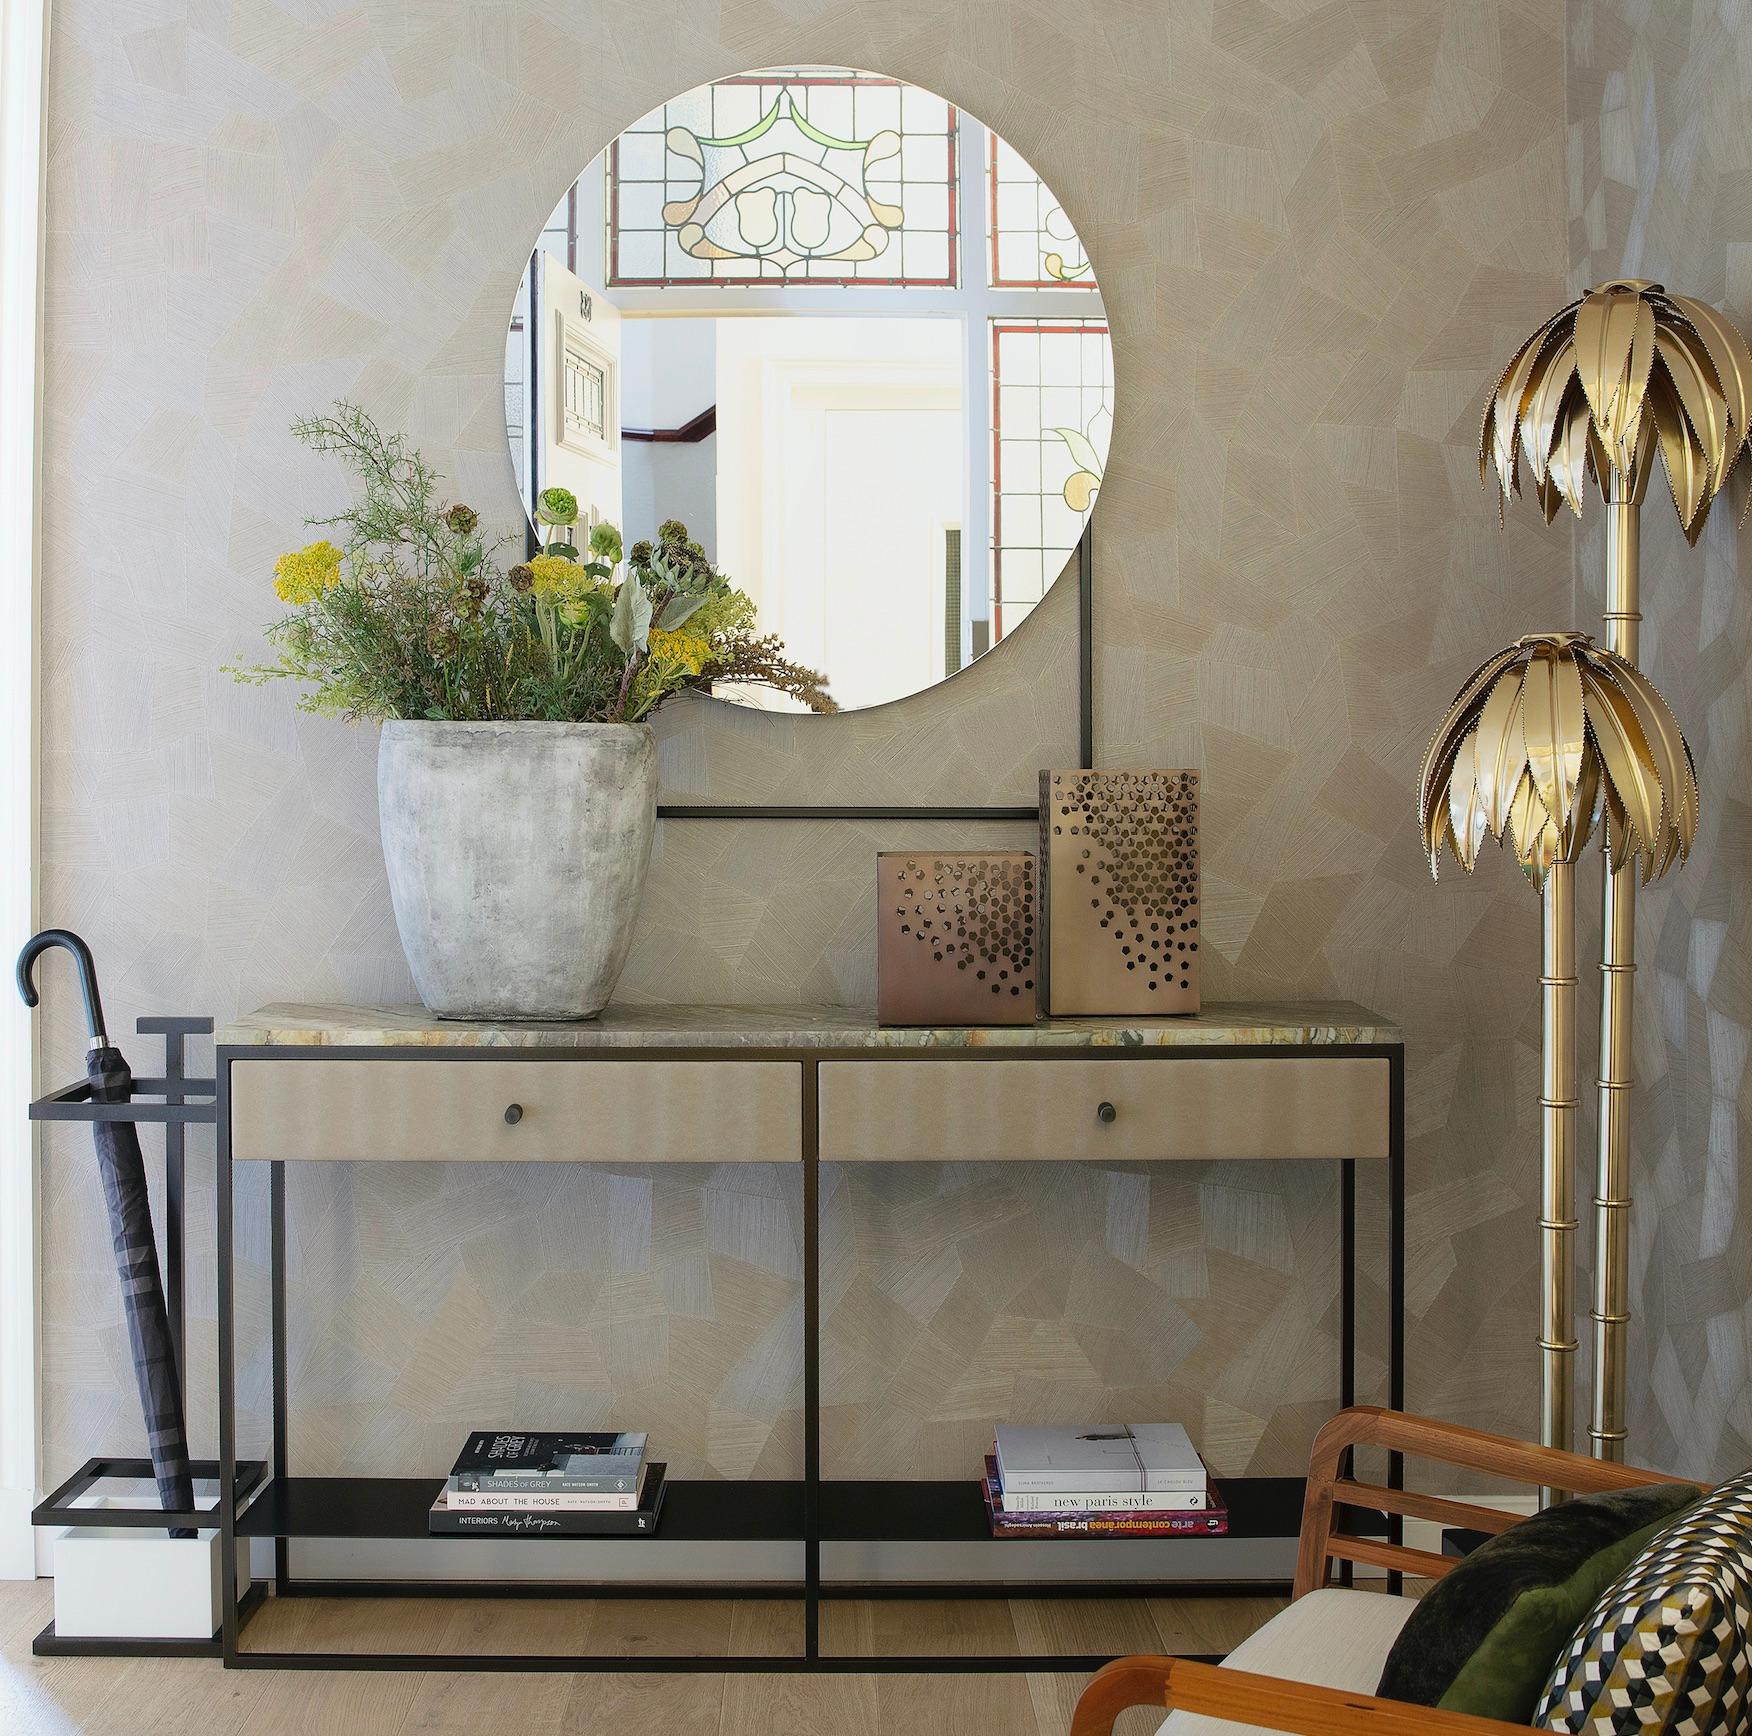 Introducing the Eros Console - the perfect addition to elevate your home's entrance or hallway to new heights of sophistication. Boasting a bold steel frame and sleek, refined design, this console is sure to catch the eye of anyone who passes by.